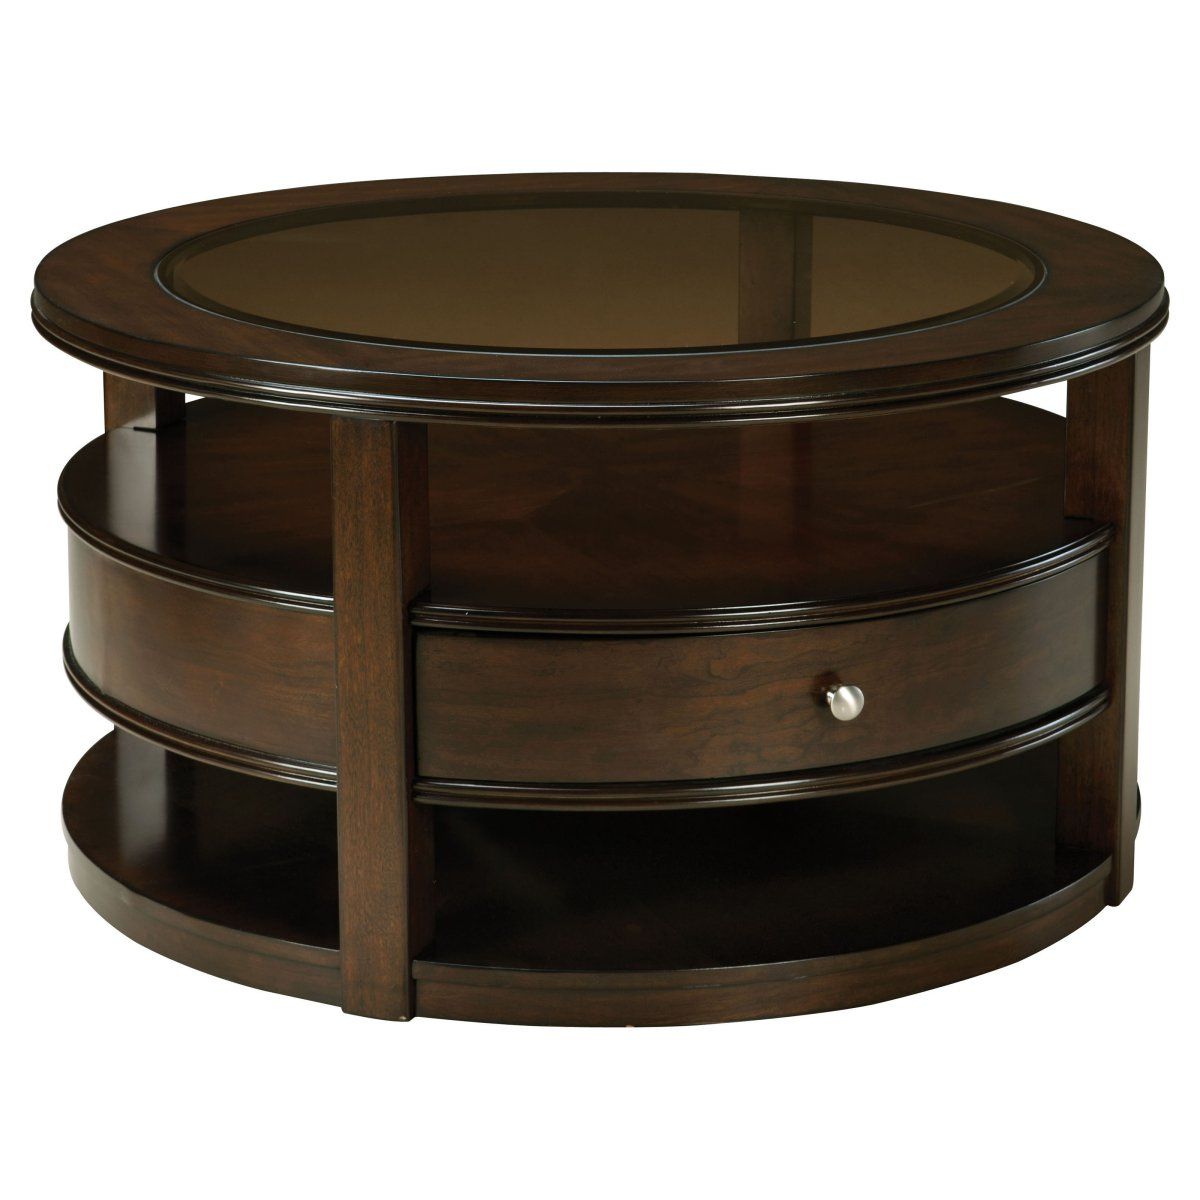 Awesome Round Coffee Tables With Storage – Homesfeed Regarding Round Coffee Tables With Storage (View 3 of 20)